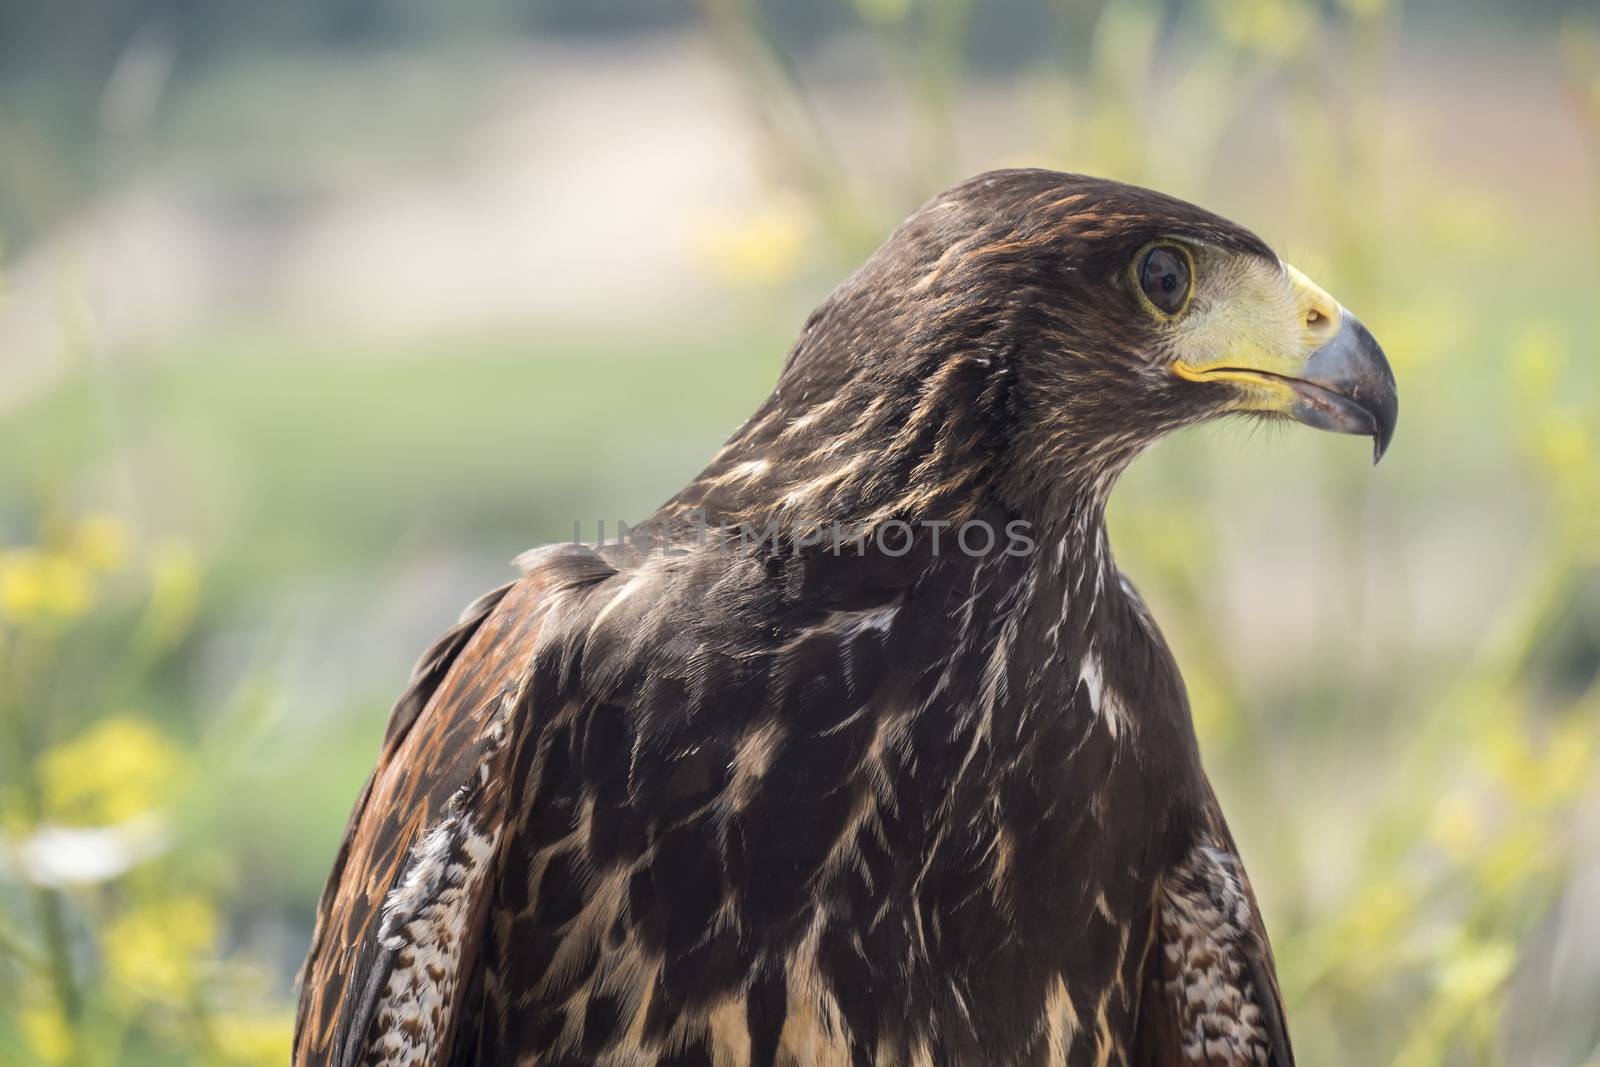 Golden eagle resting in the sun with open mouth by max8xam